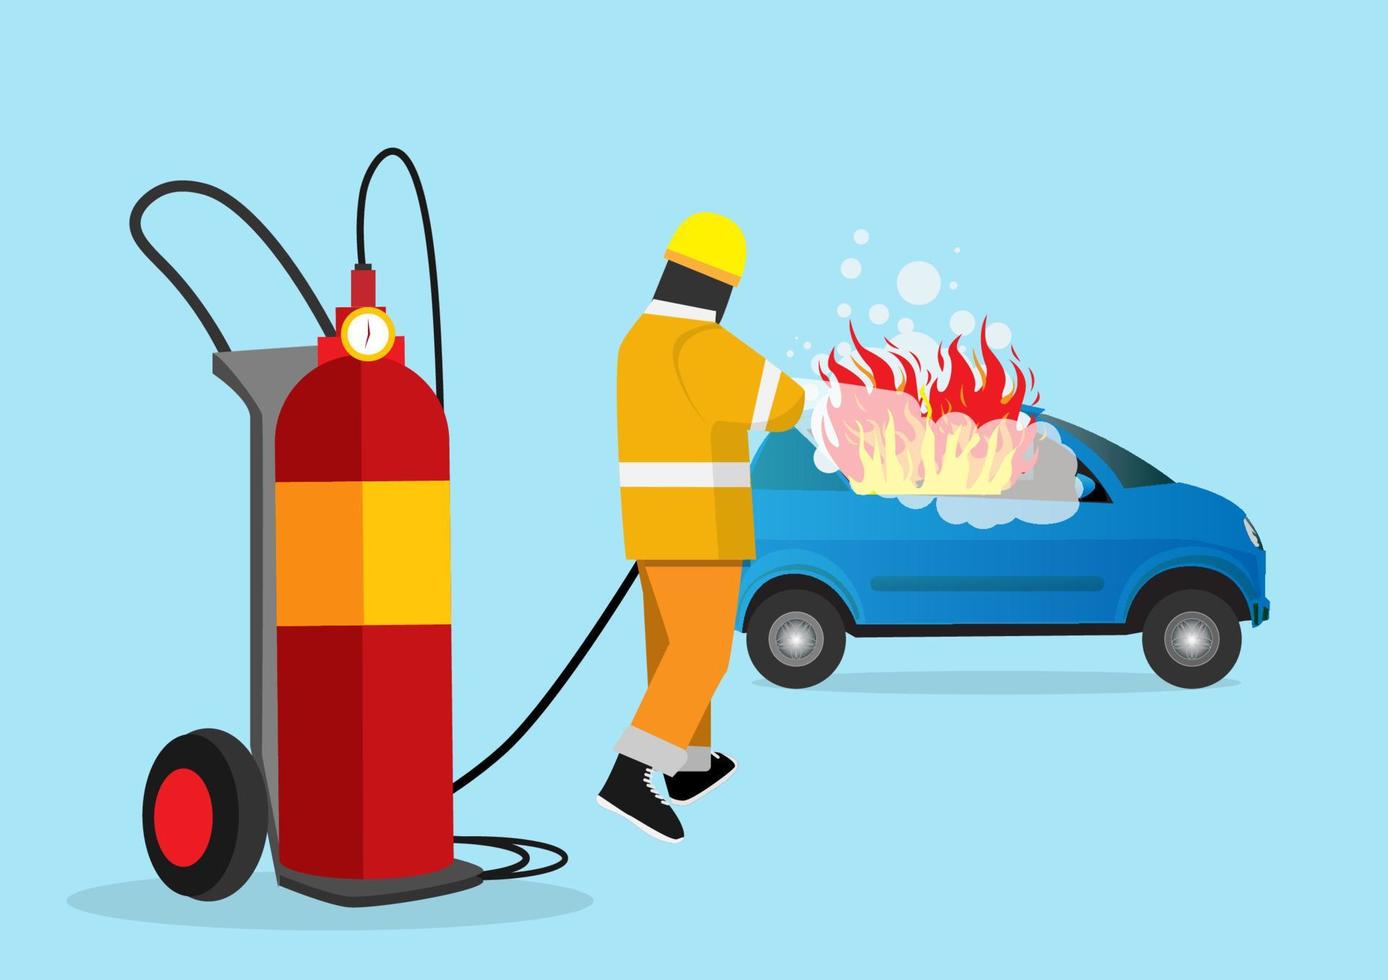 Extinguish the fire. Firefighters carry nozzles with mobile fire extinguishers. to put out the fire of a four-door car that is on fire. Flat style cartoon illustration vector